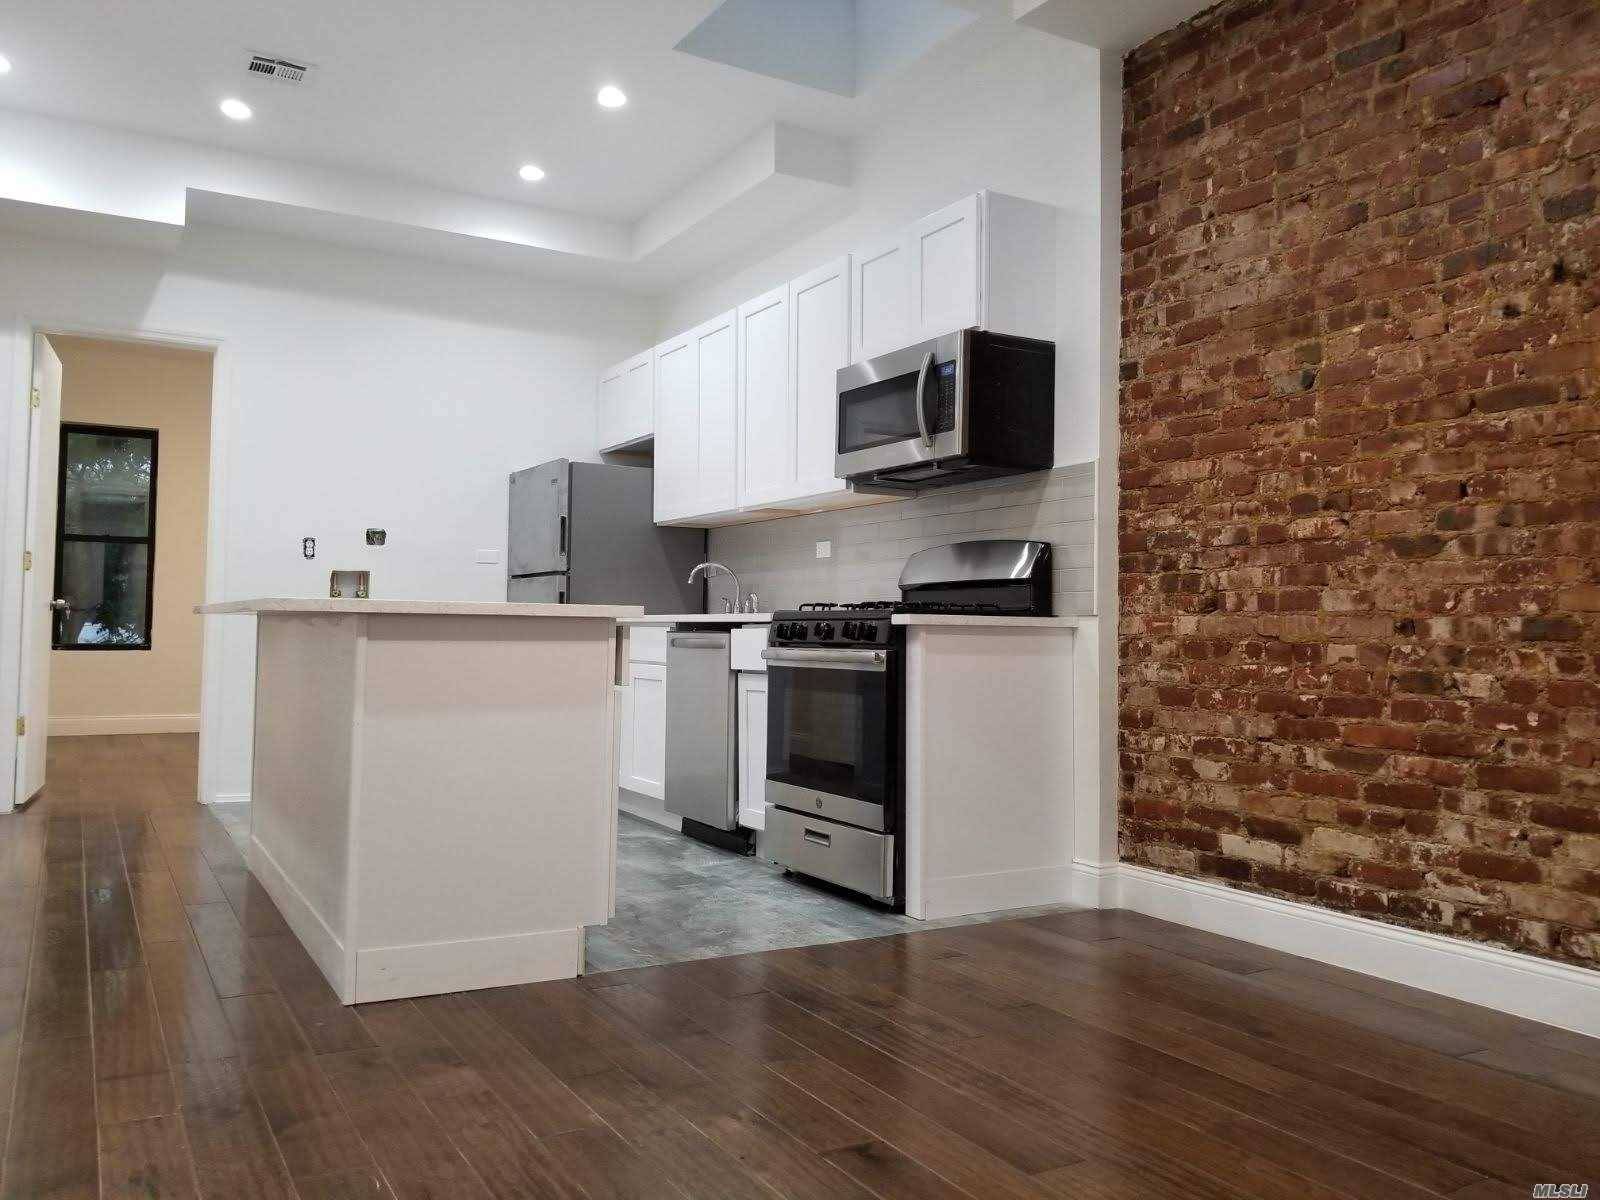 Gorgeous, Brand New, Completely Renovated Brownstone Apartment In The Hottest Neighborhood In Brooklyn!